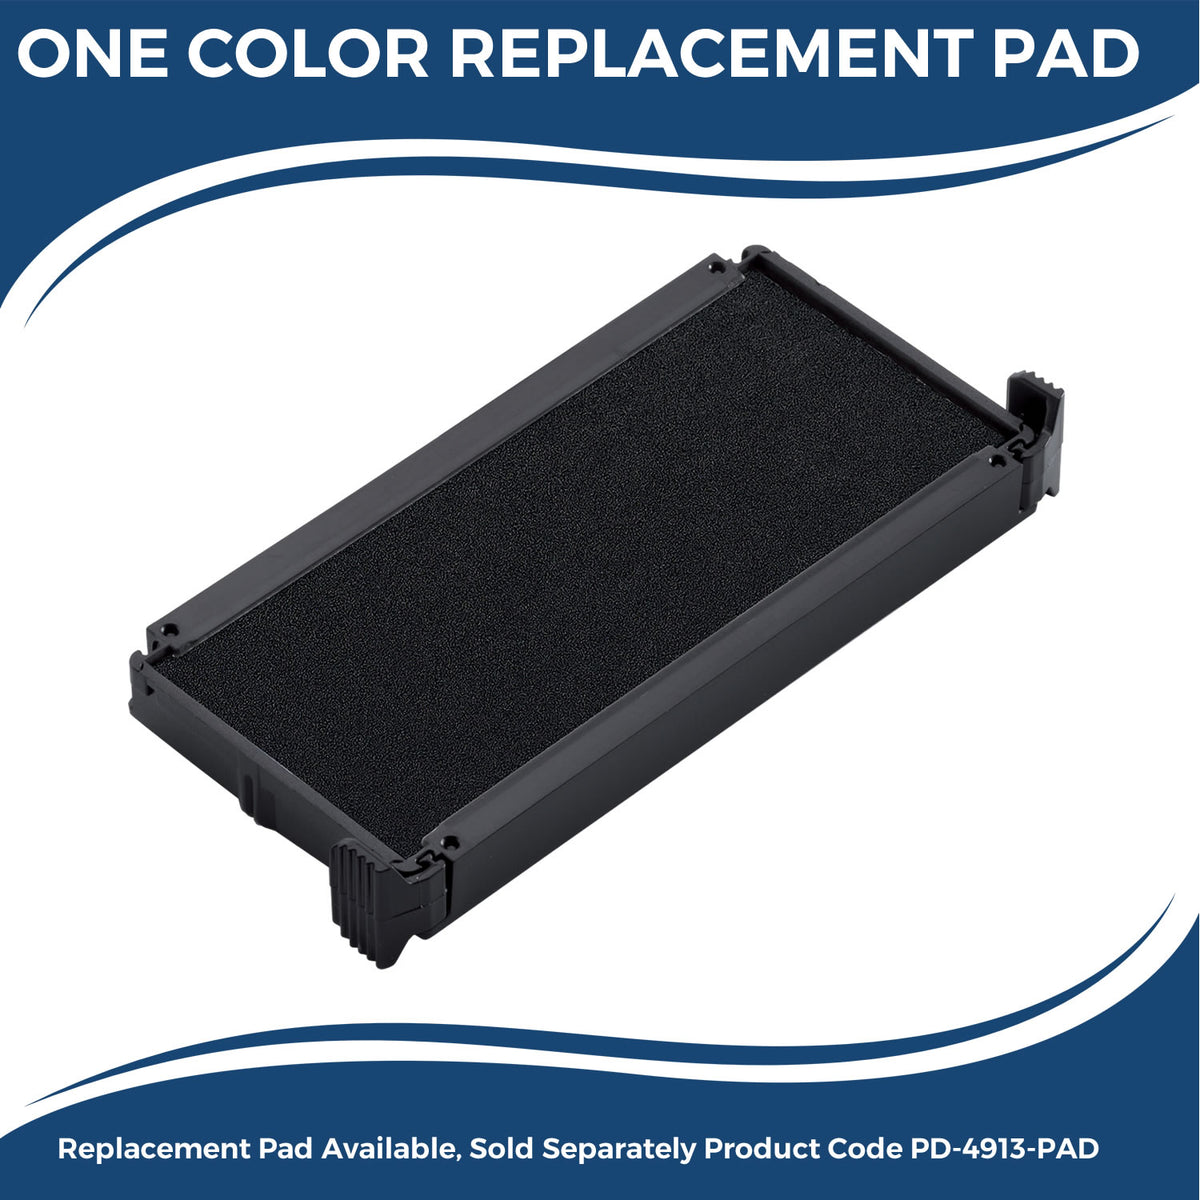 Large Self-Inking Bold Covid-19 Stamp 5513S Large Replacment Pad